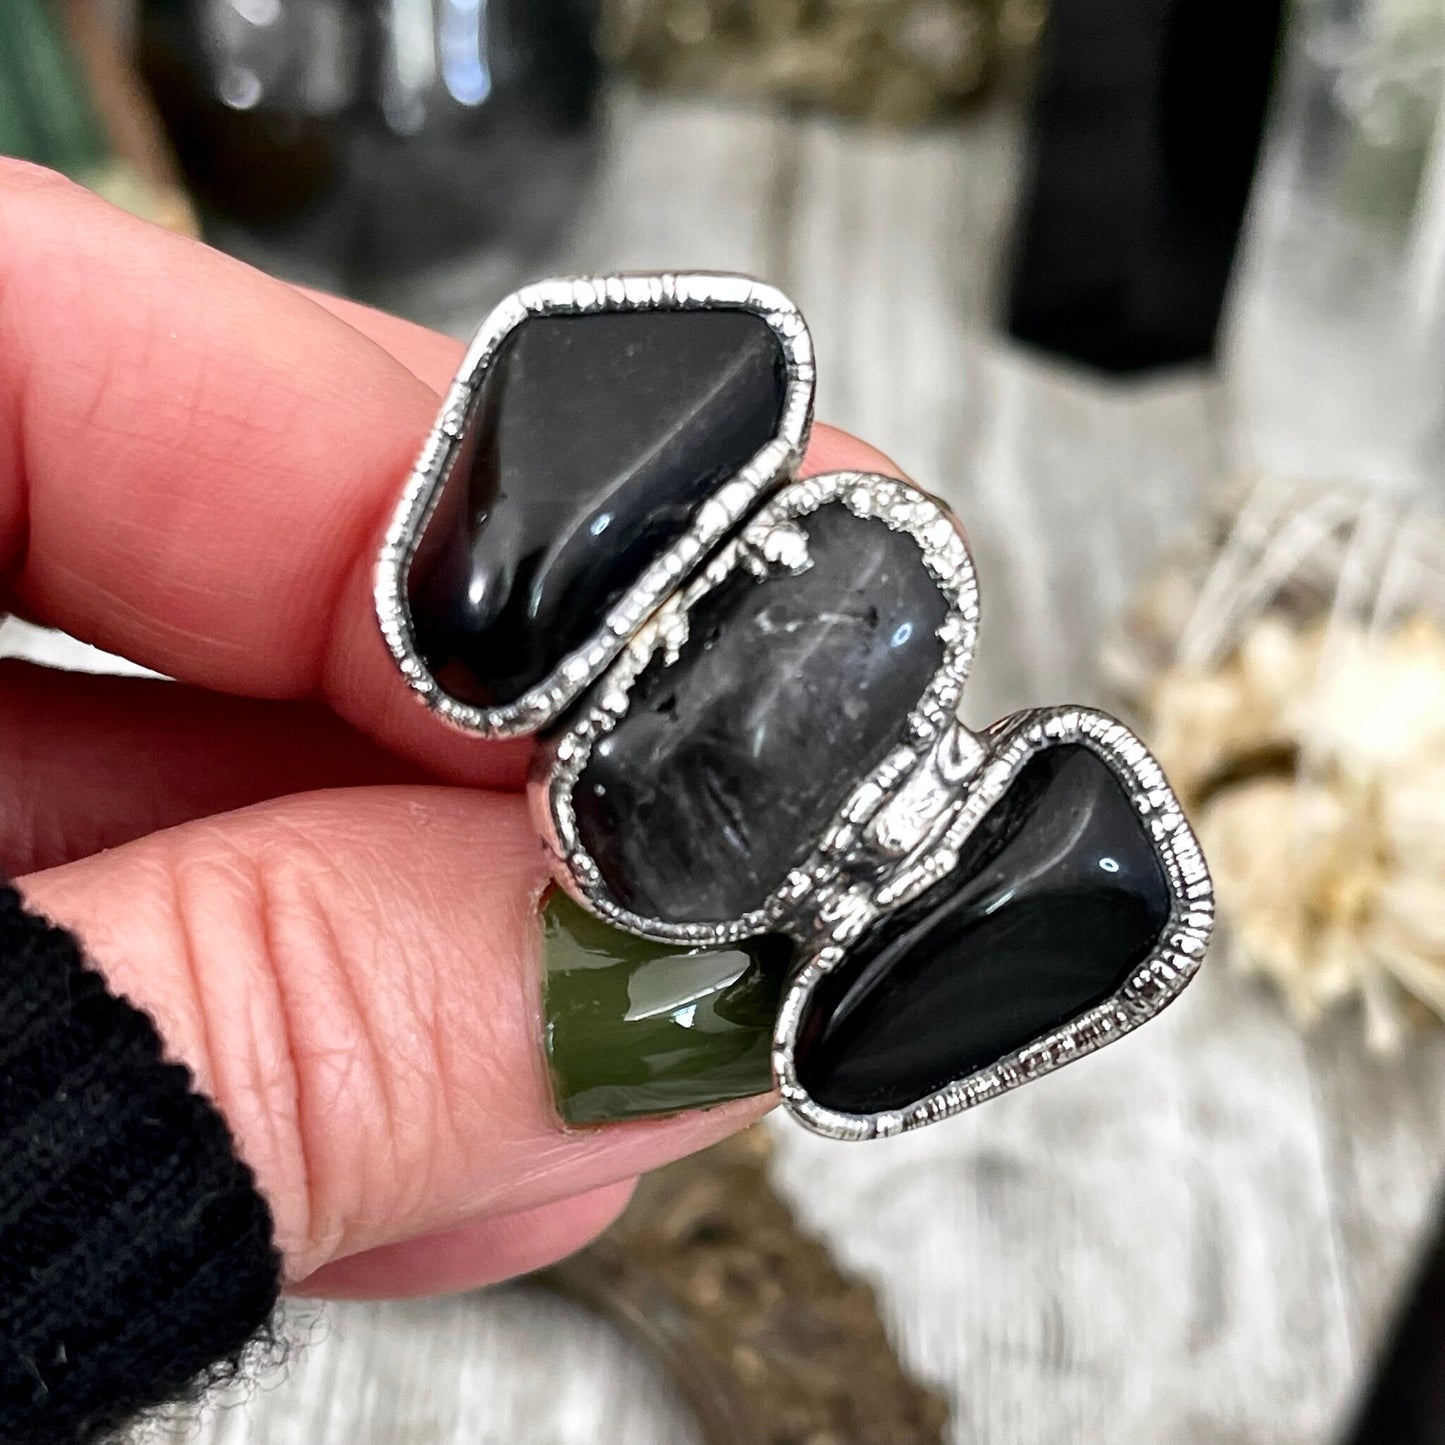 Size 7.5 Crystal Ring - Three Stone Ring Black Onyx Tourmaline Quartz Silver Ring / Foxlark Collection - One of a Kind / Big Crystal Jewelry